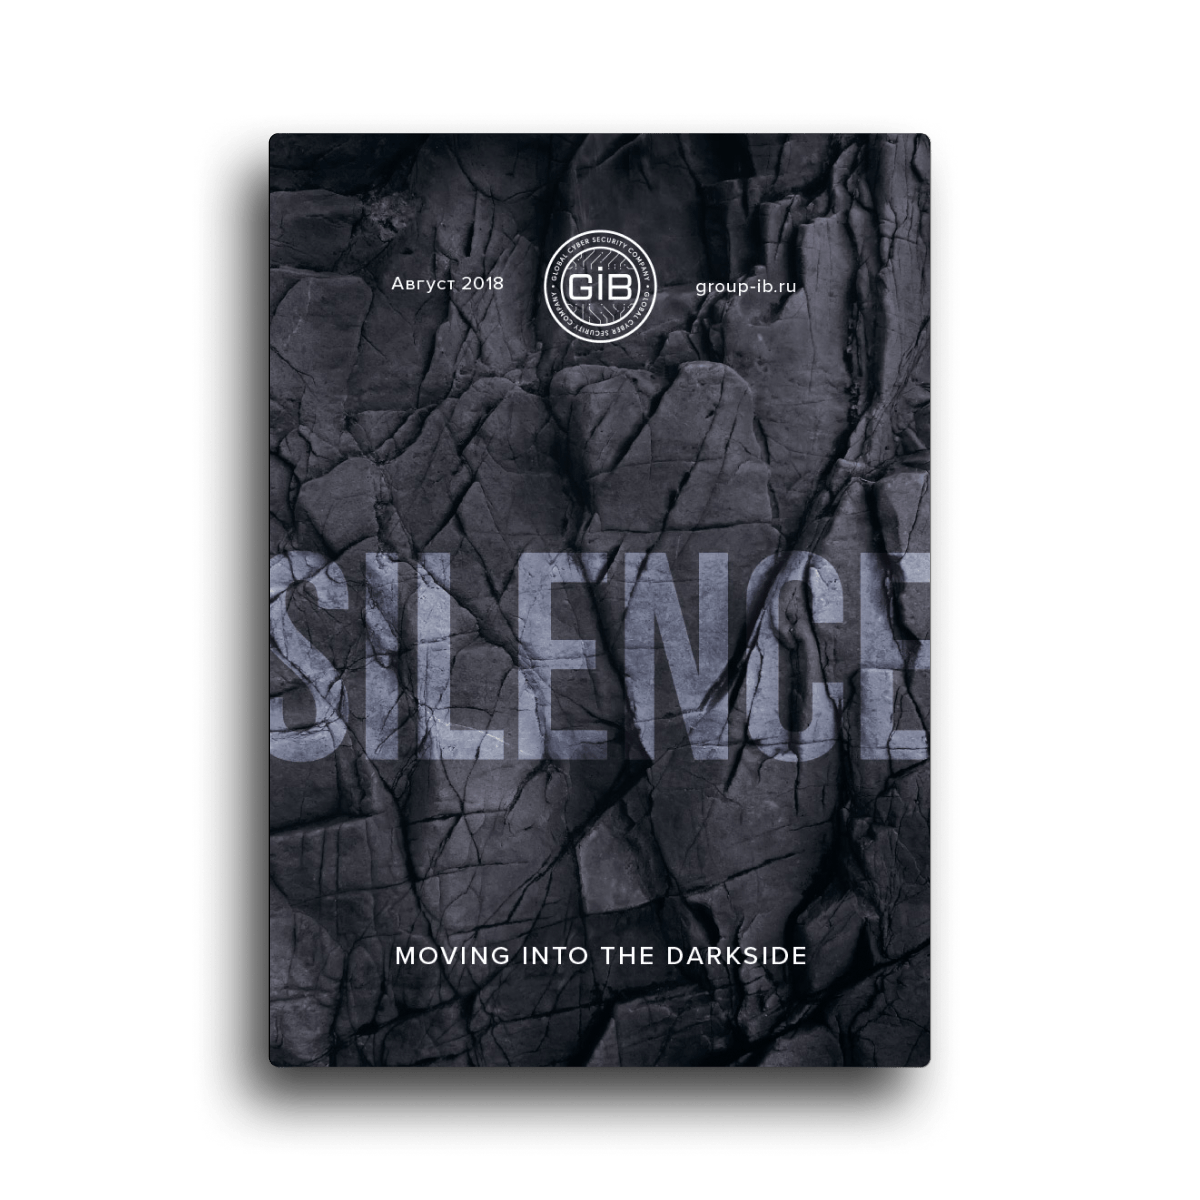 Silence: Moving into the darkside